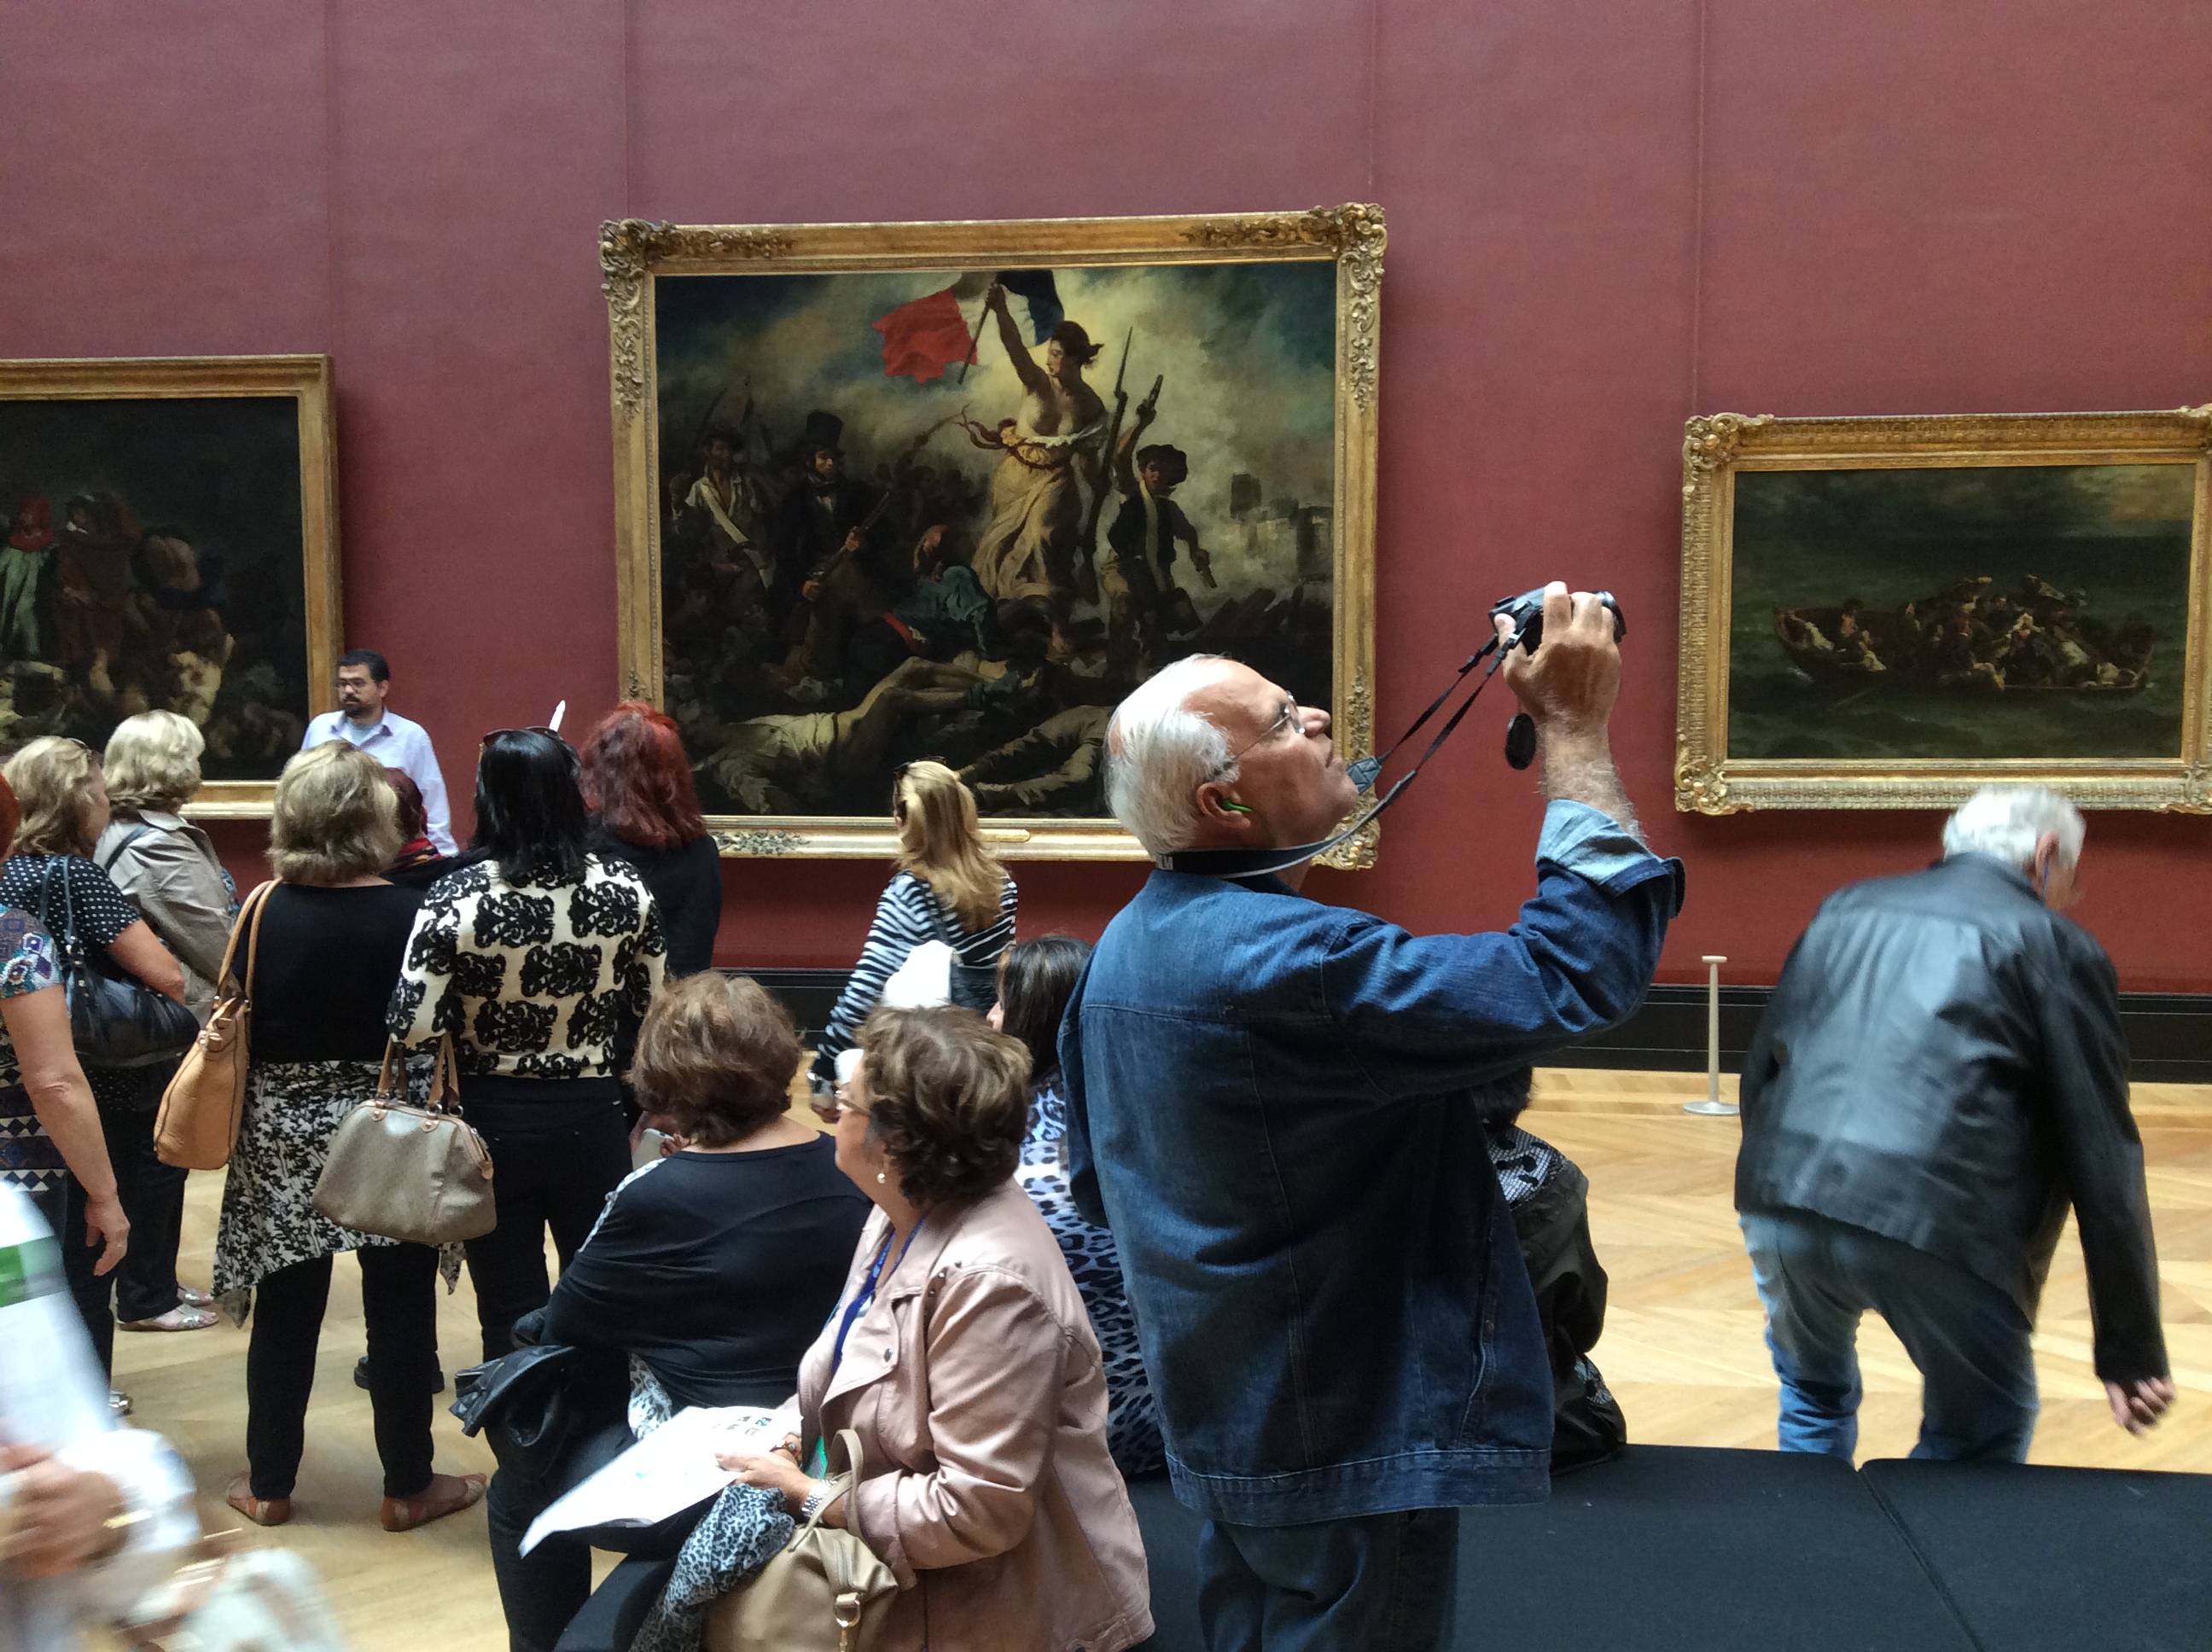 Western masterpieces are just the tip of the iceberg at the Louvre Museum.